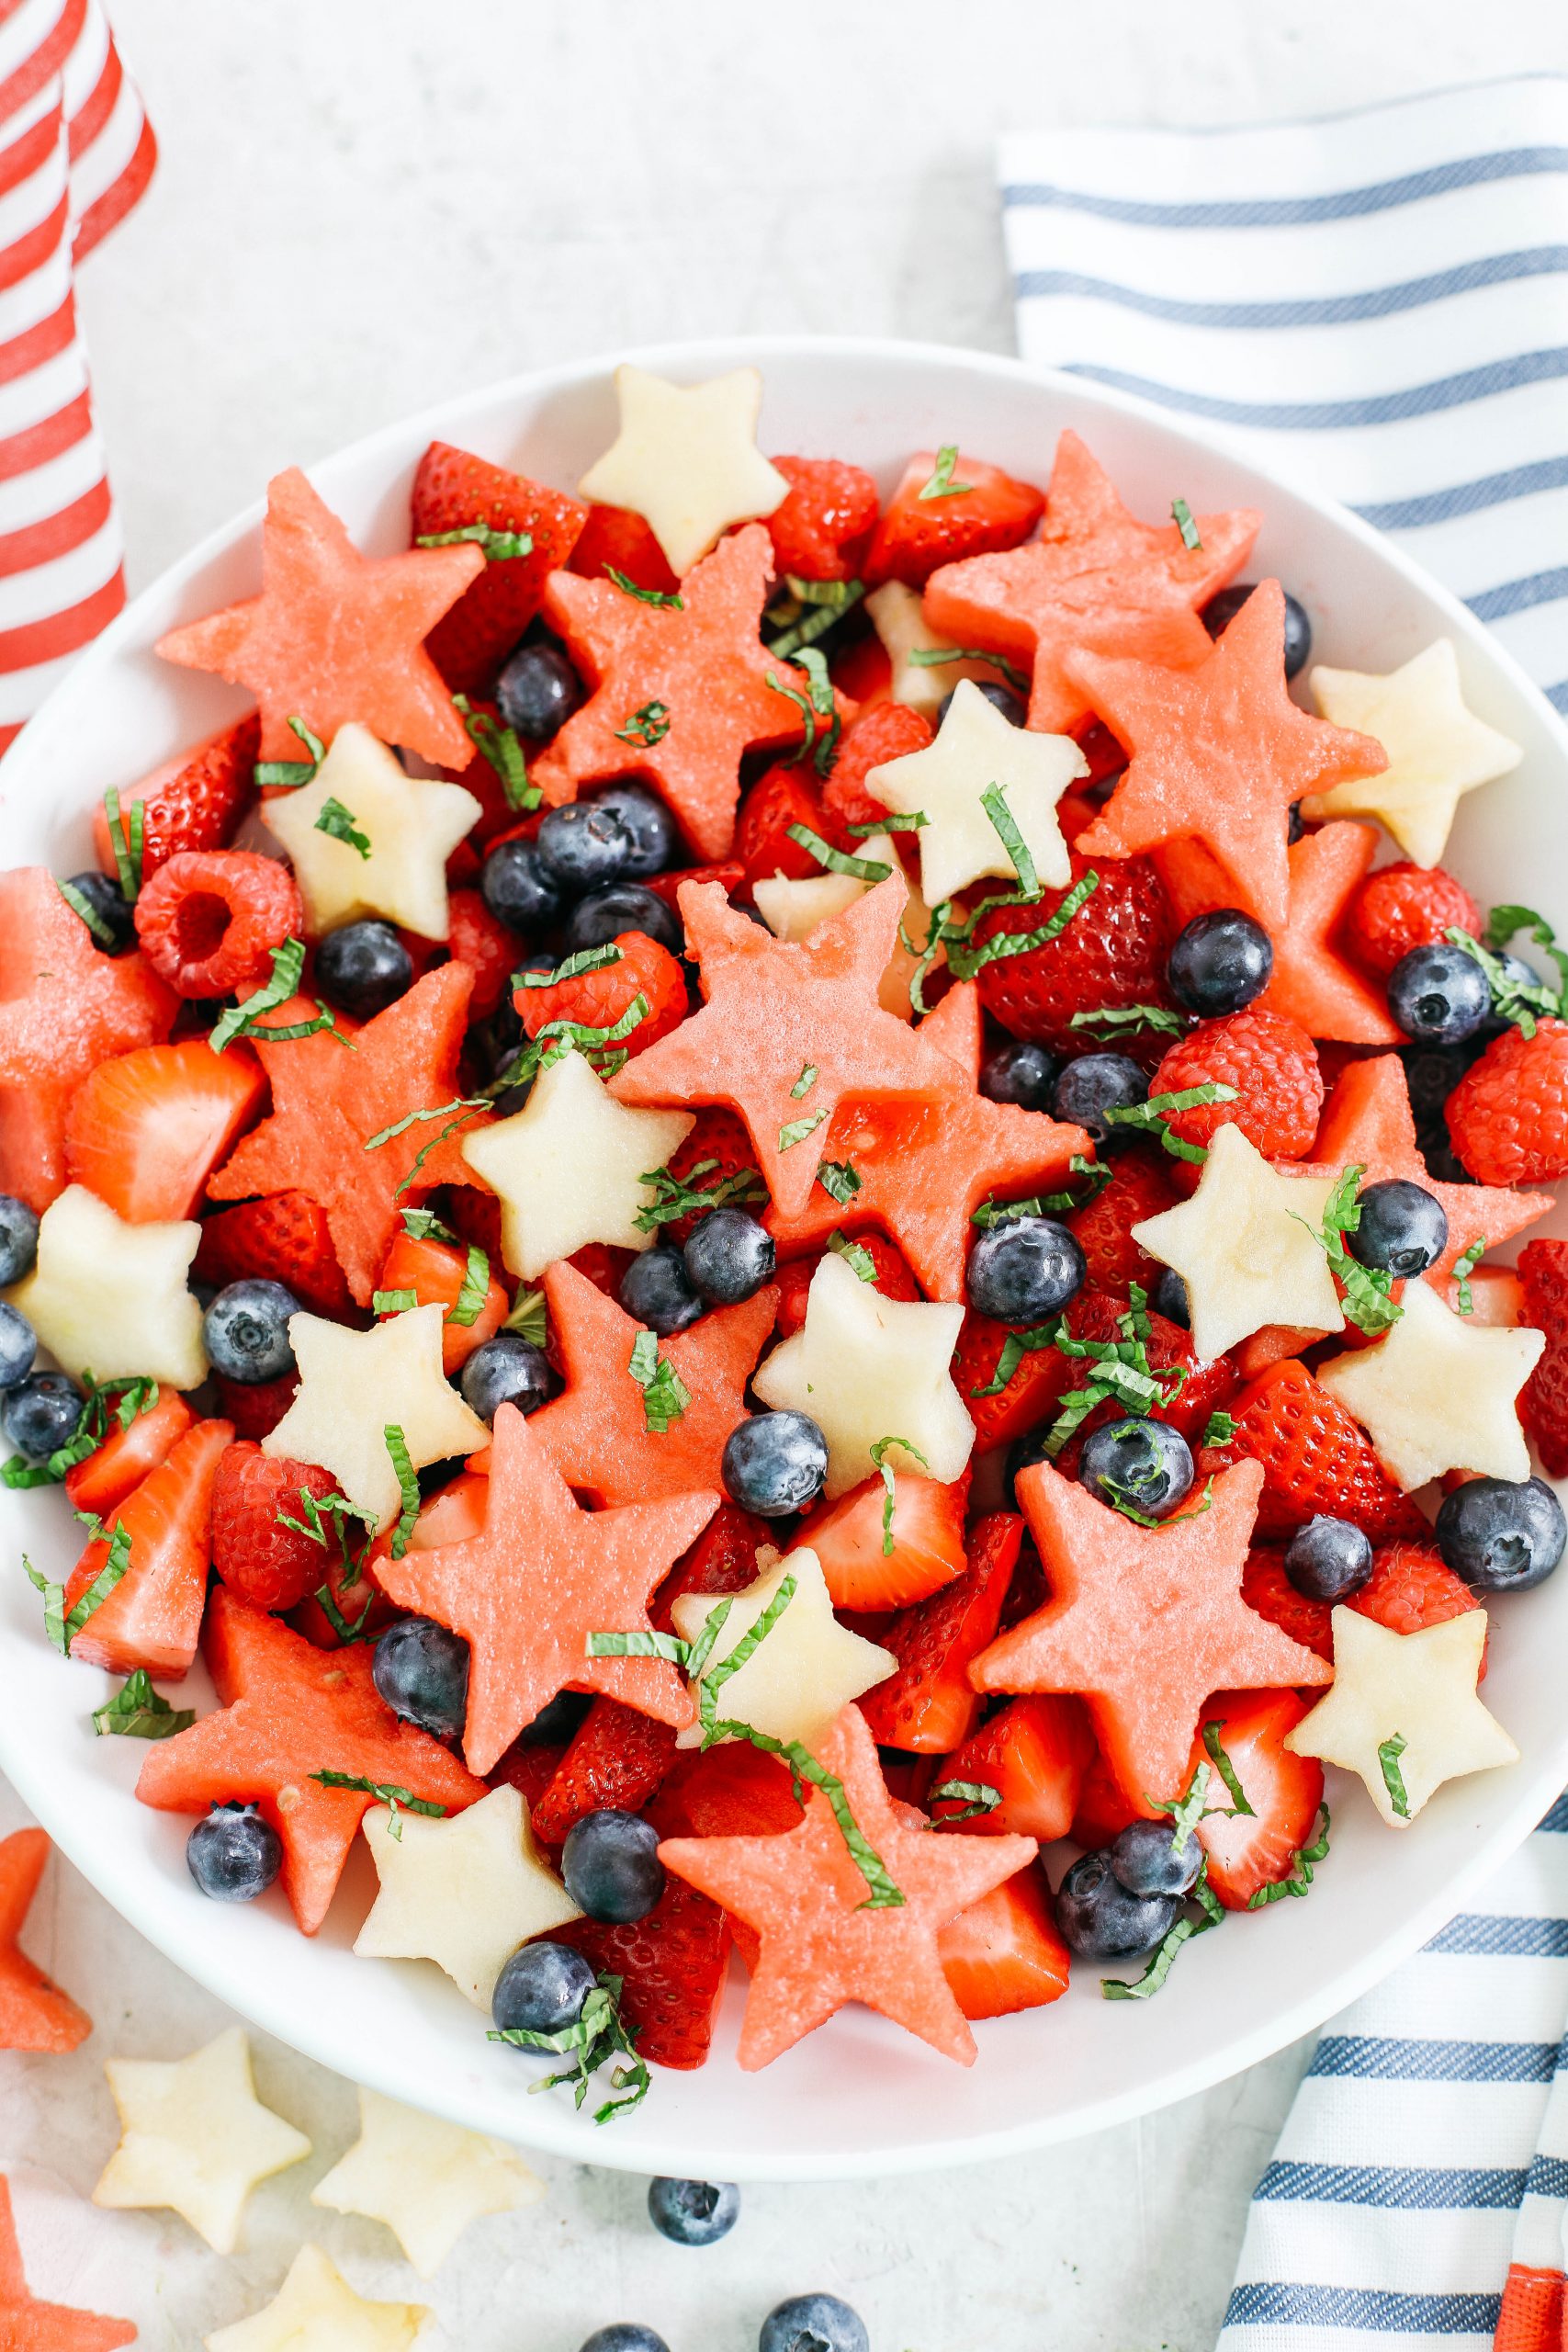 Kick off the 4th of July weekend with this fresh and festive Red, White and Blueberry Fruit Salad packed juicy watermelon, crisp apples and delicious berries all tossed together in a honey-citrus dressing!